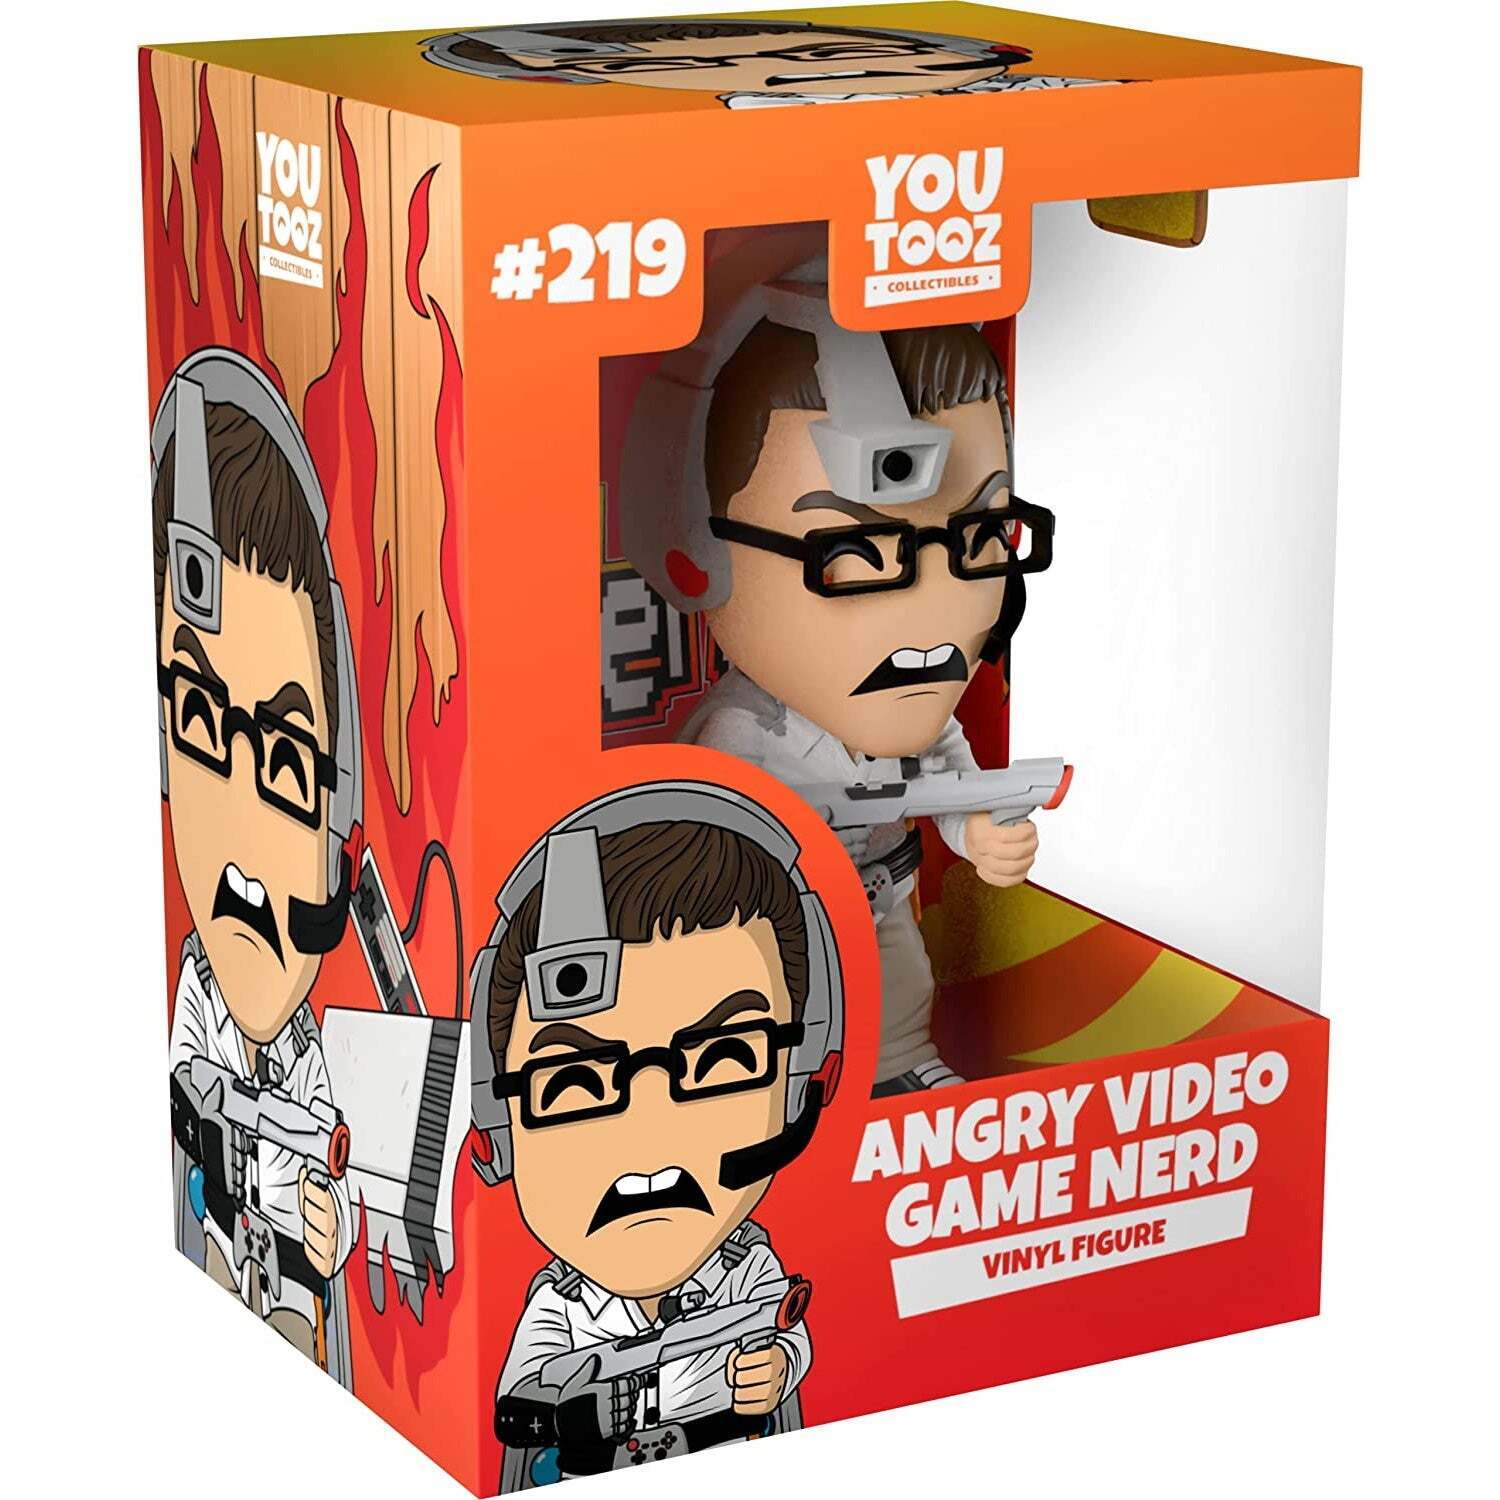 Youtooz: Angry Video Game Nerd Vinyl Figure [Toys, Ages 15+, #219]